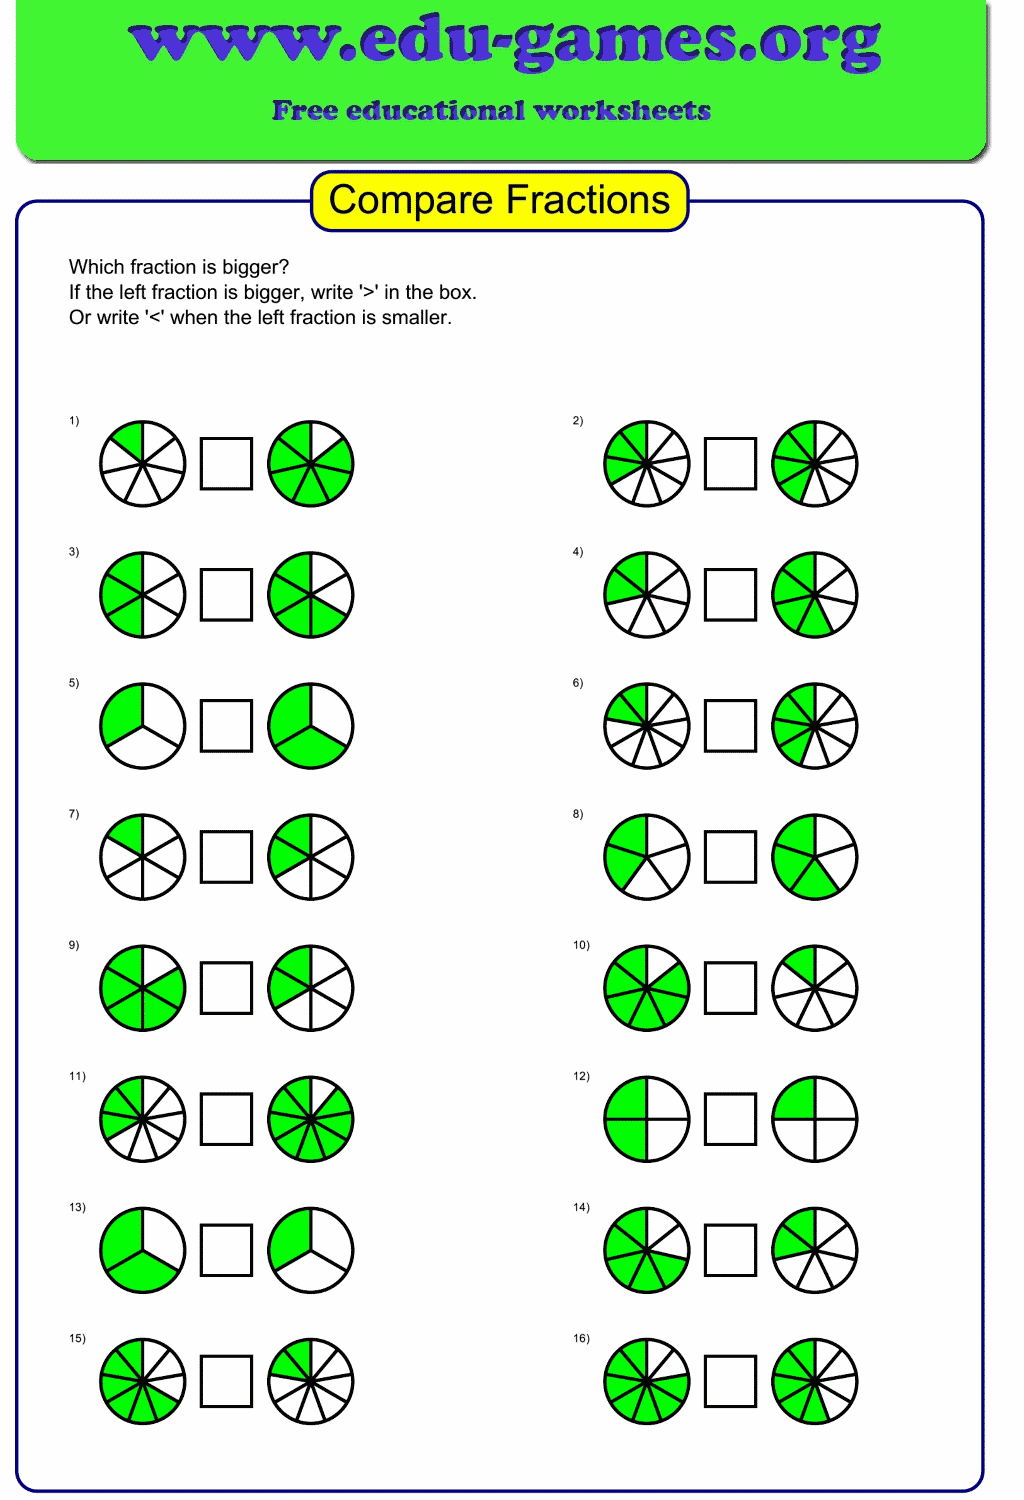 Compare Graphical Fractions Worksheet Free Printable 